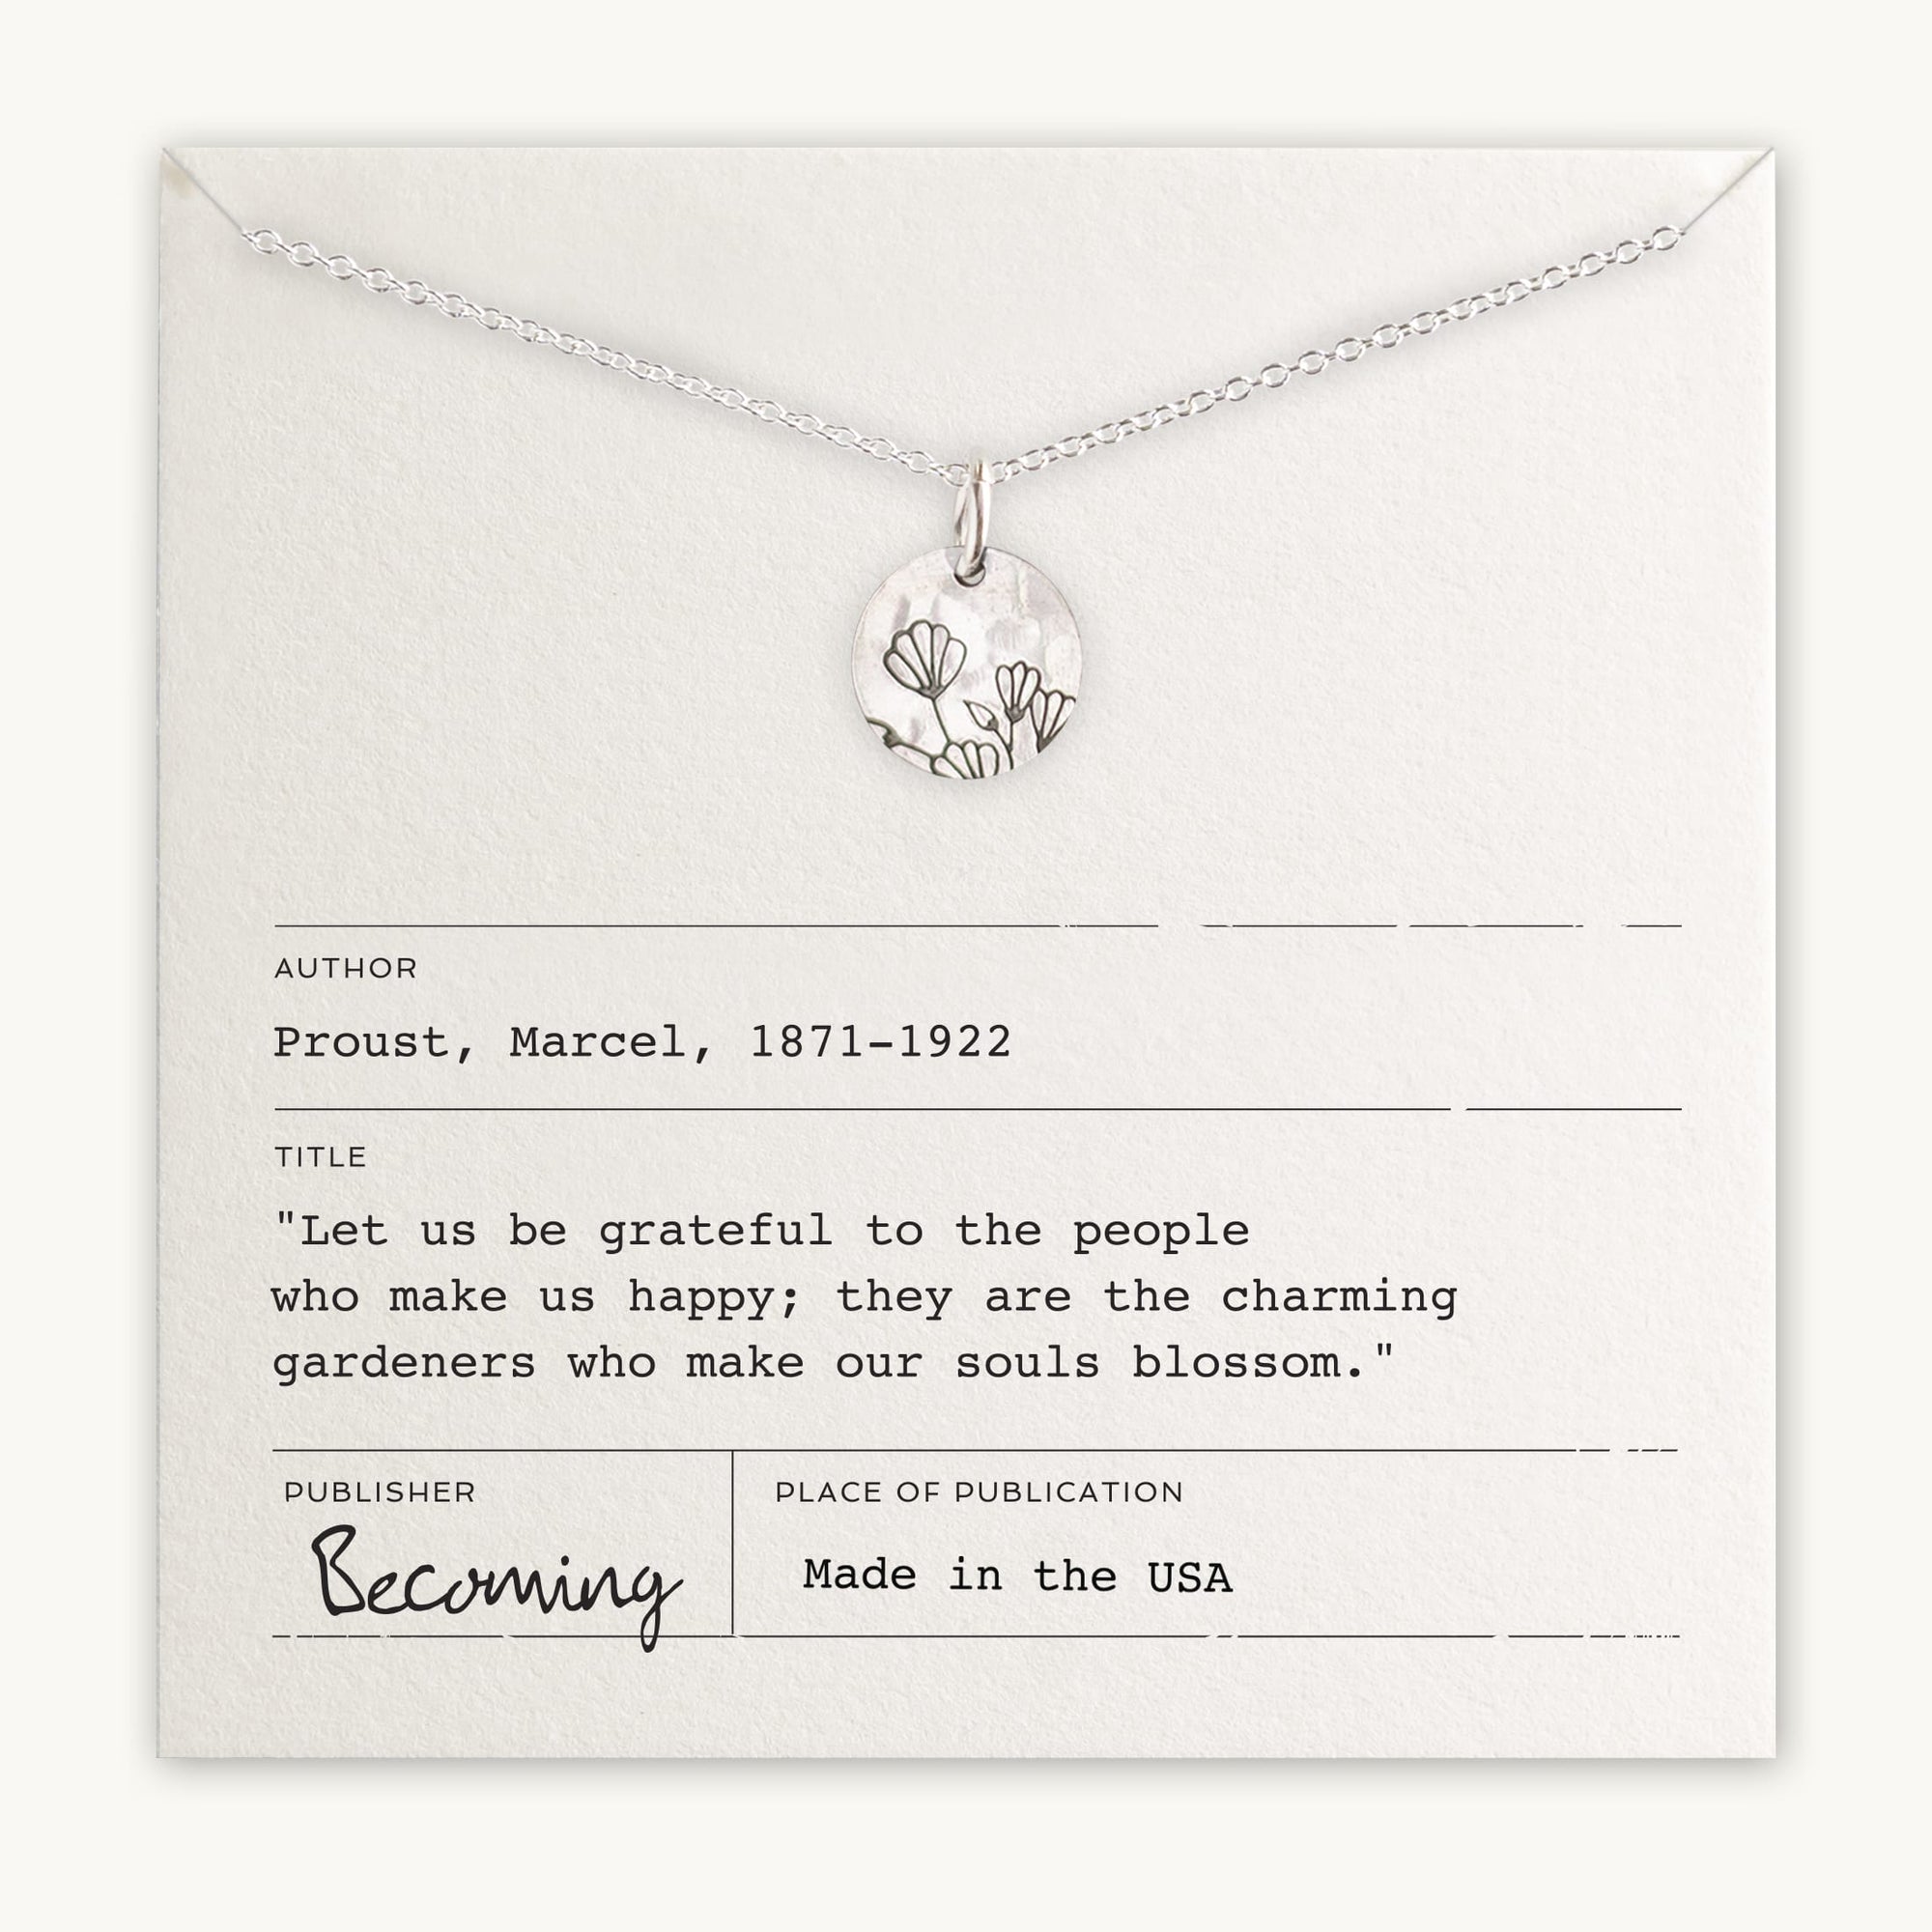 Becoming Jewelry&#39;s Blossom Necklace with a tree pendant on a card with a Marcel Proust quote about gratitude and happiness.